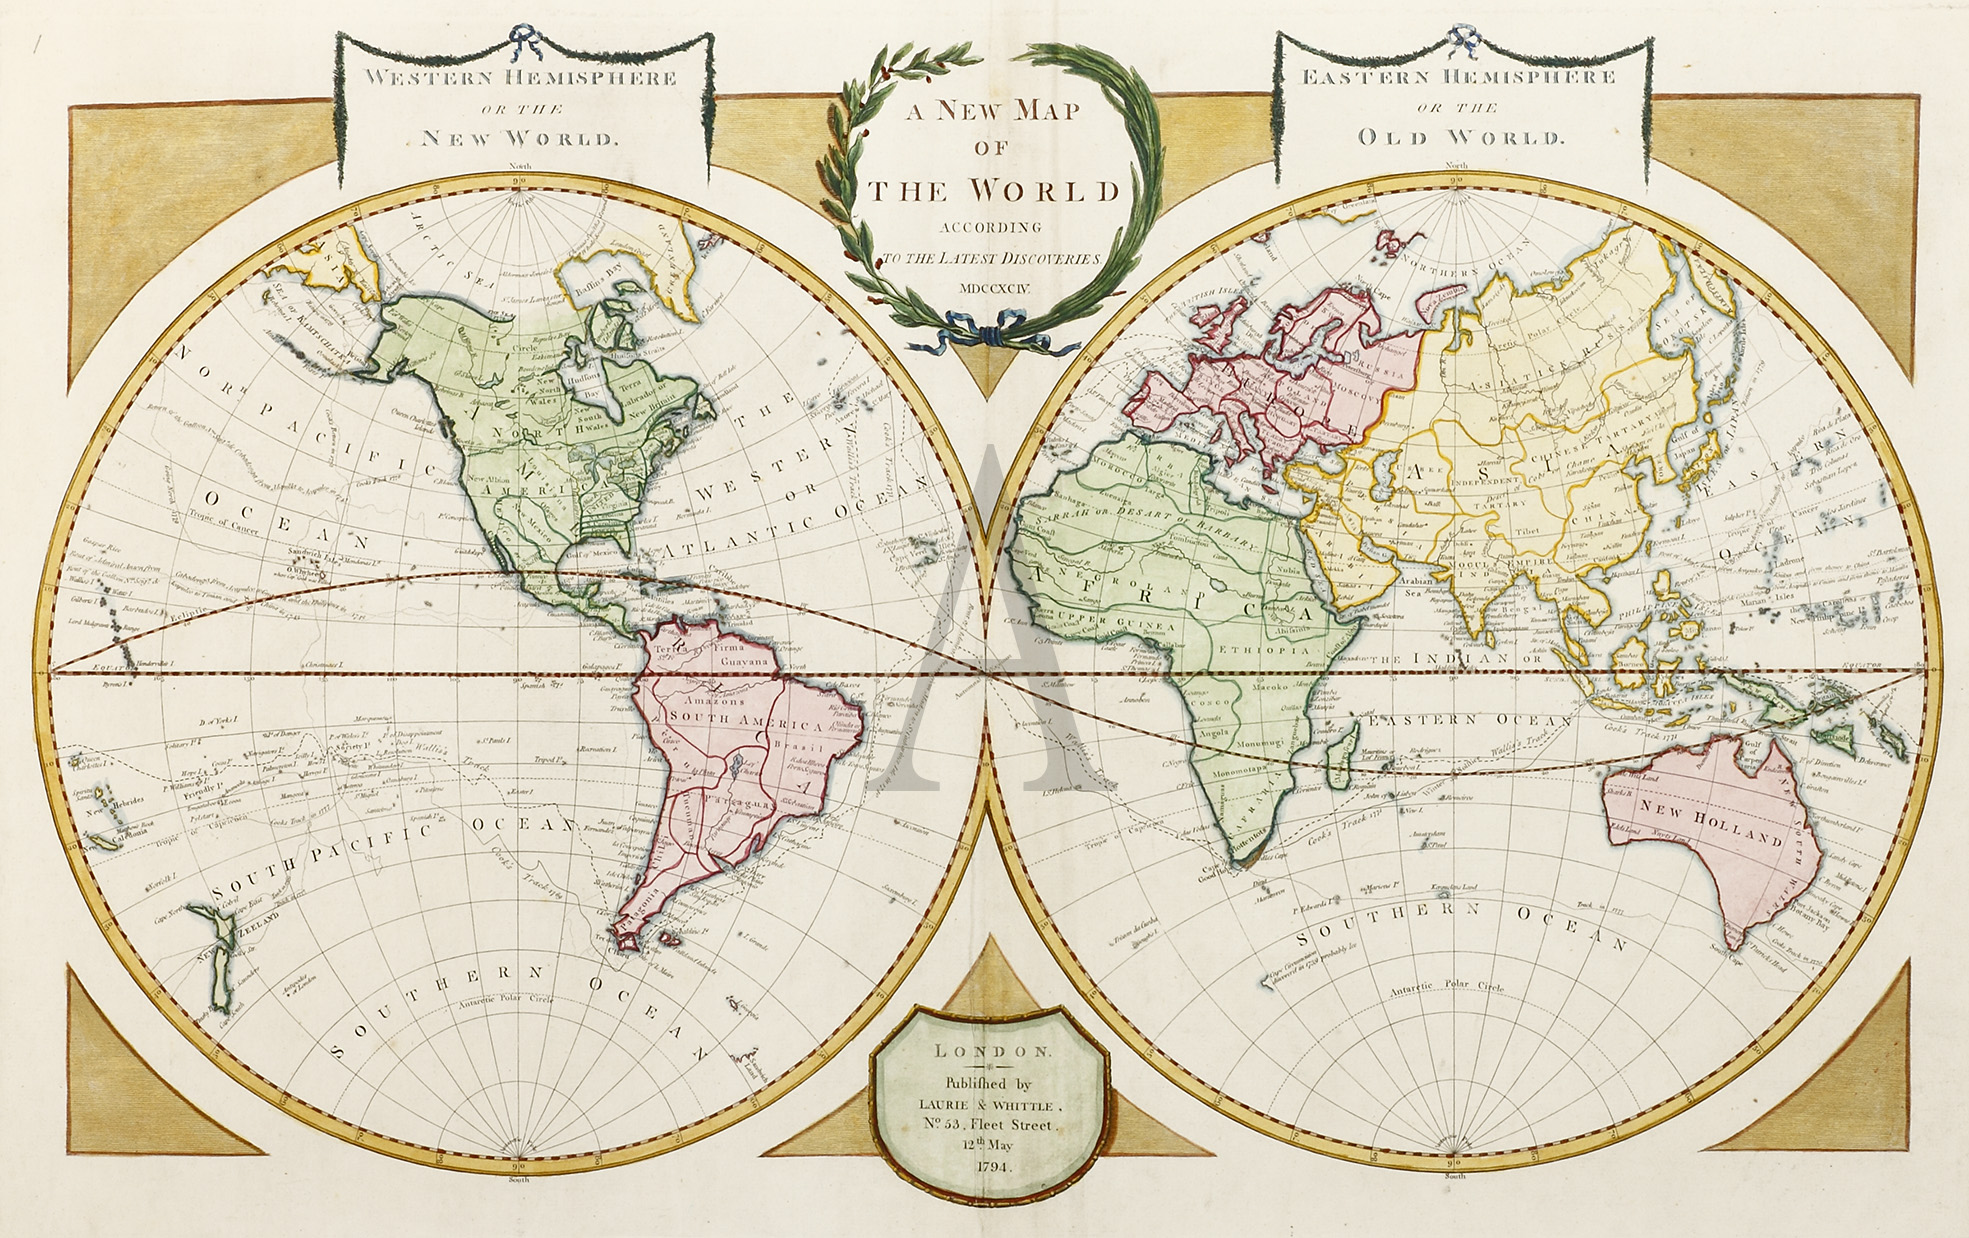 A New Map of the World According to the Latest Discoveries MCCXCIV. - Antique Print from 1794